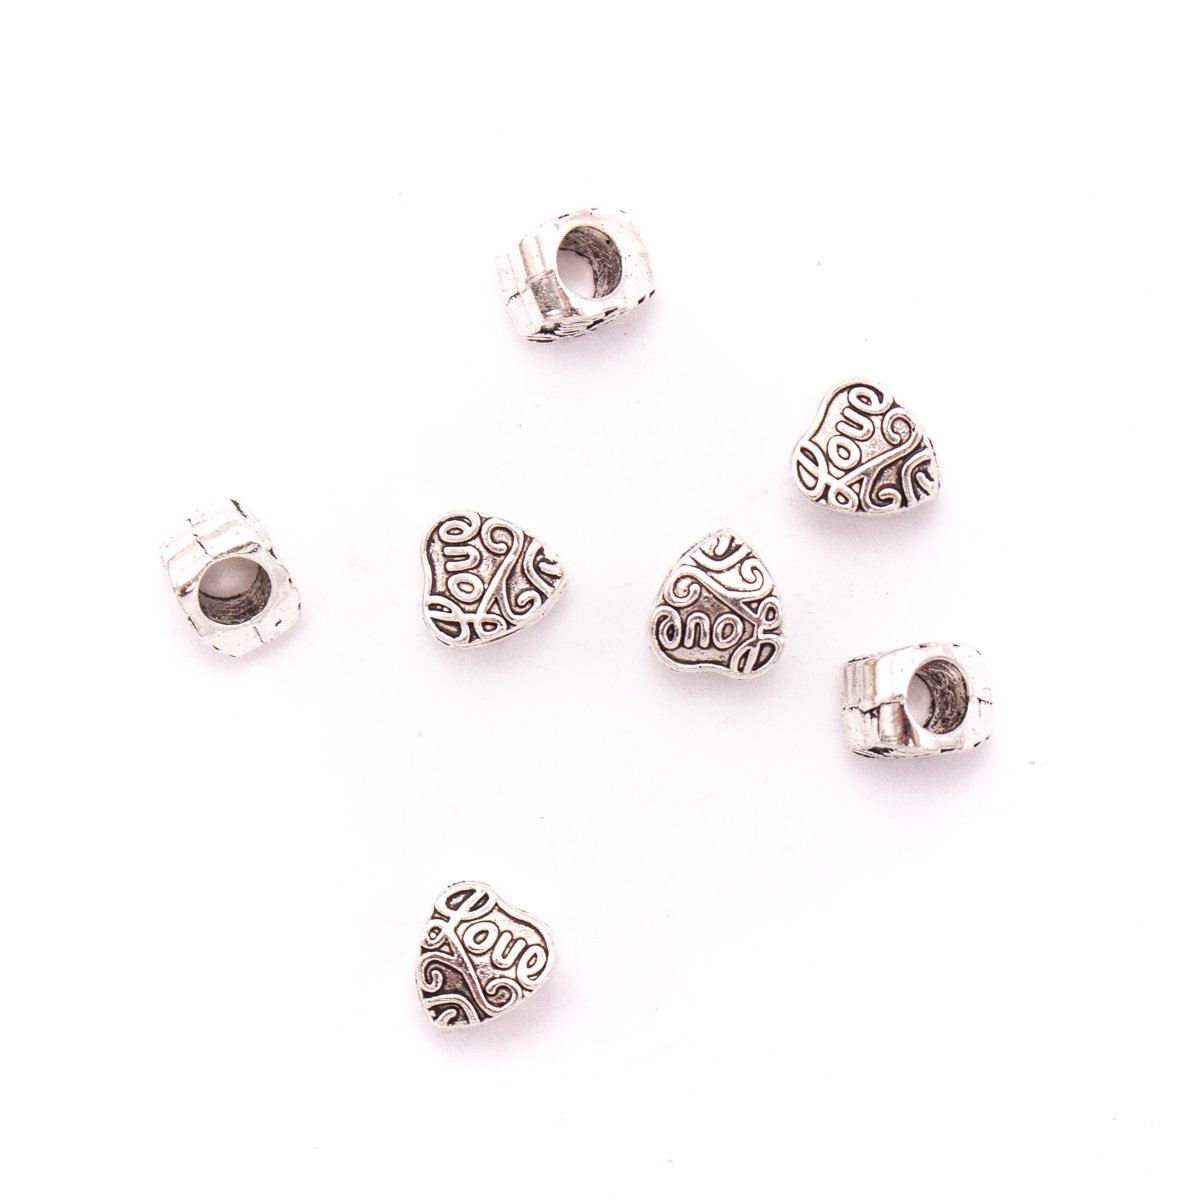 20PCS For 5mm leather antique silver zamak heart beads, Jewelry supply Findings Components- D-5-5-148